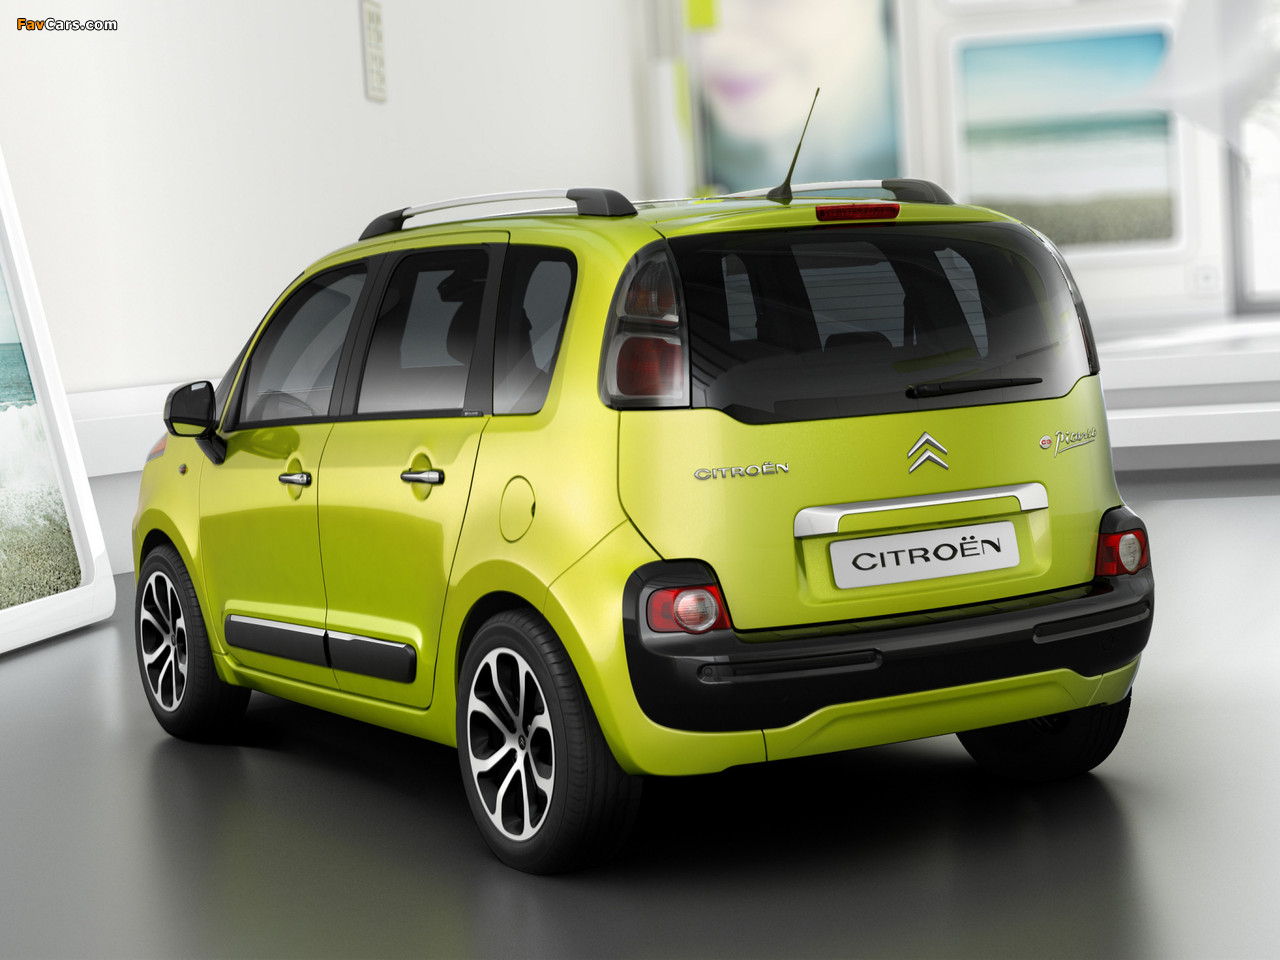 Pictures of Citroën C3 Picasso 2009 (1280 x 960)